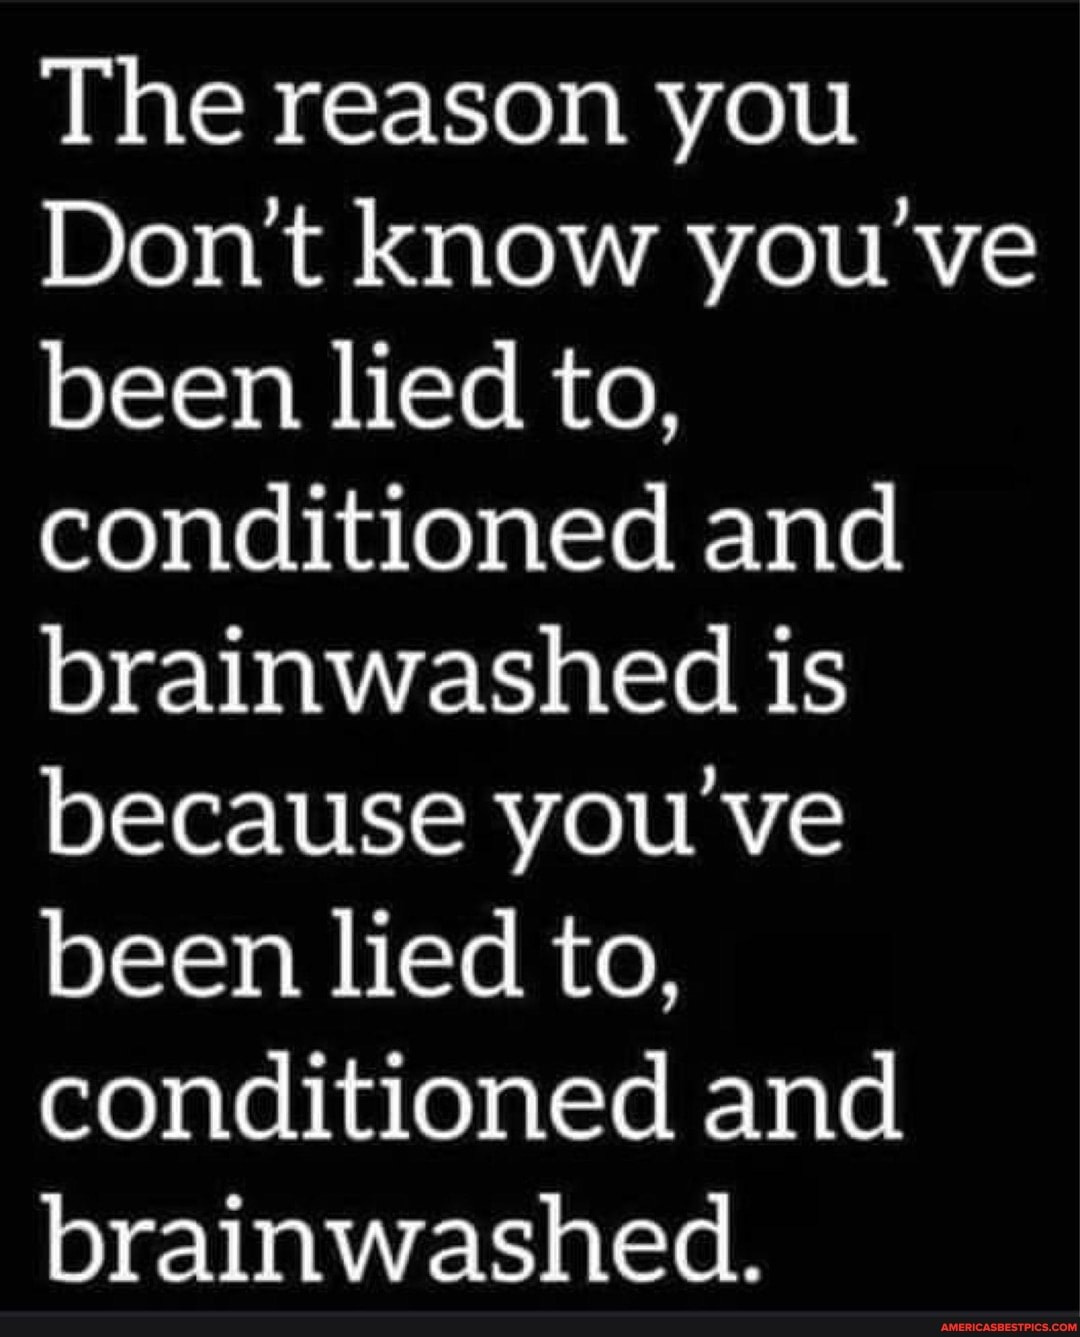 The Reason You Don't Know You've Been Lied to, Conditioned, and Brainwashed Meme